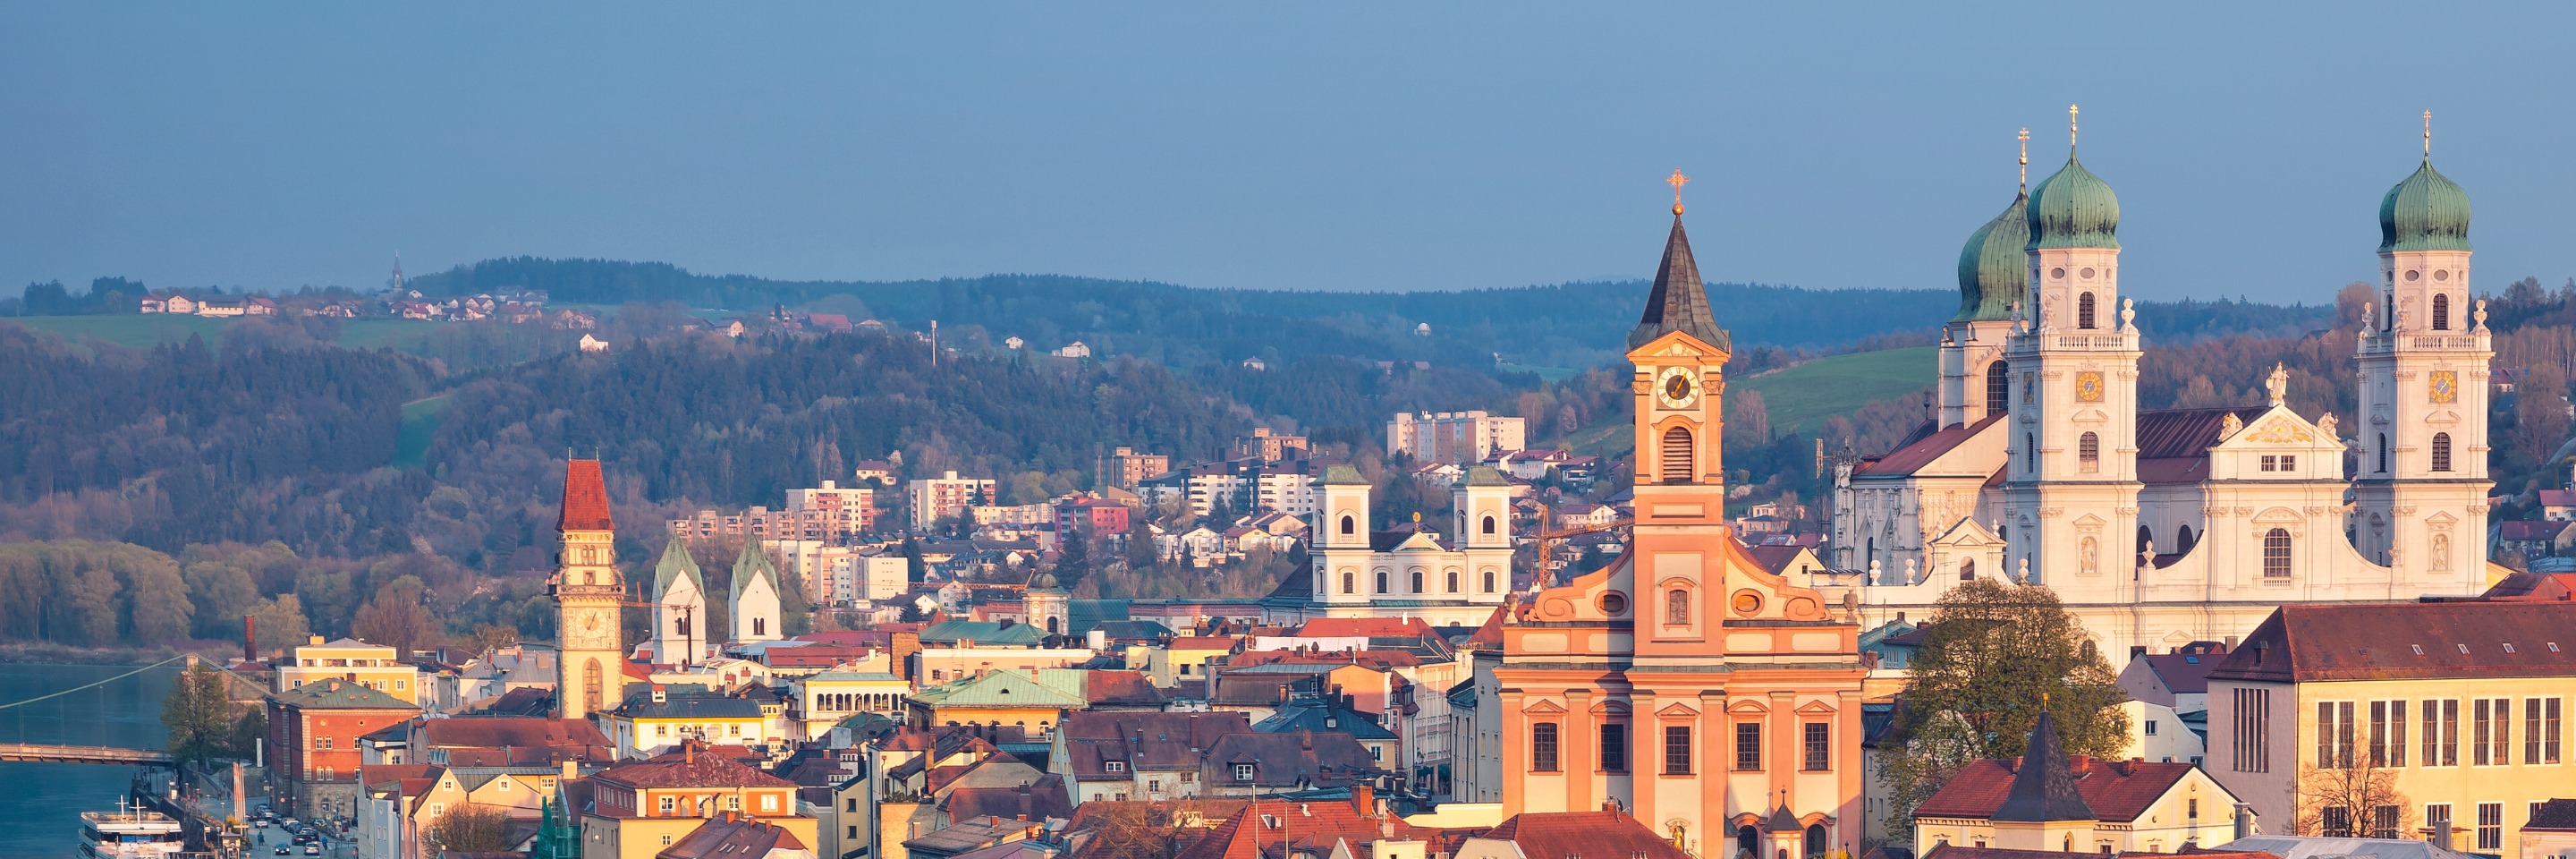 Danube Dreams with 2 Nights in Prague with Jewish Heritage (Westbound)